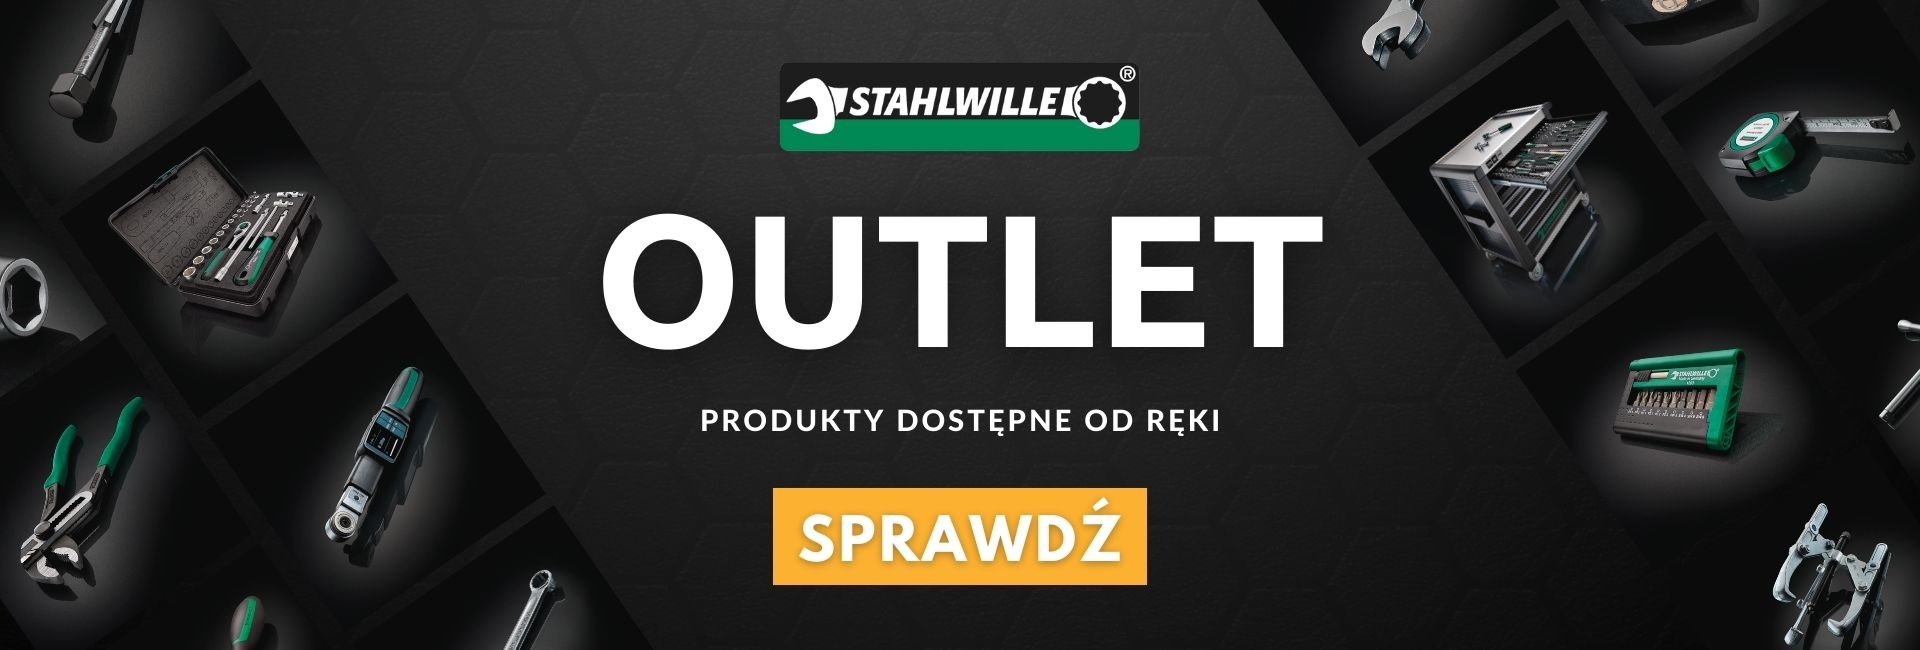 outlet_stahlwille